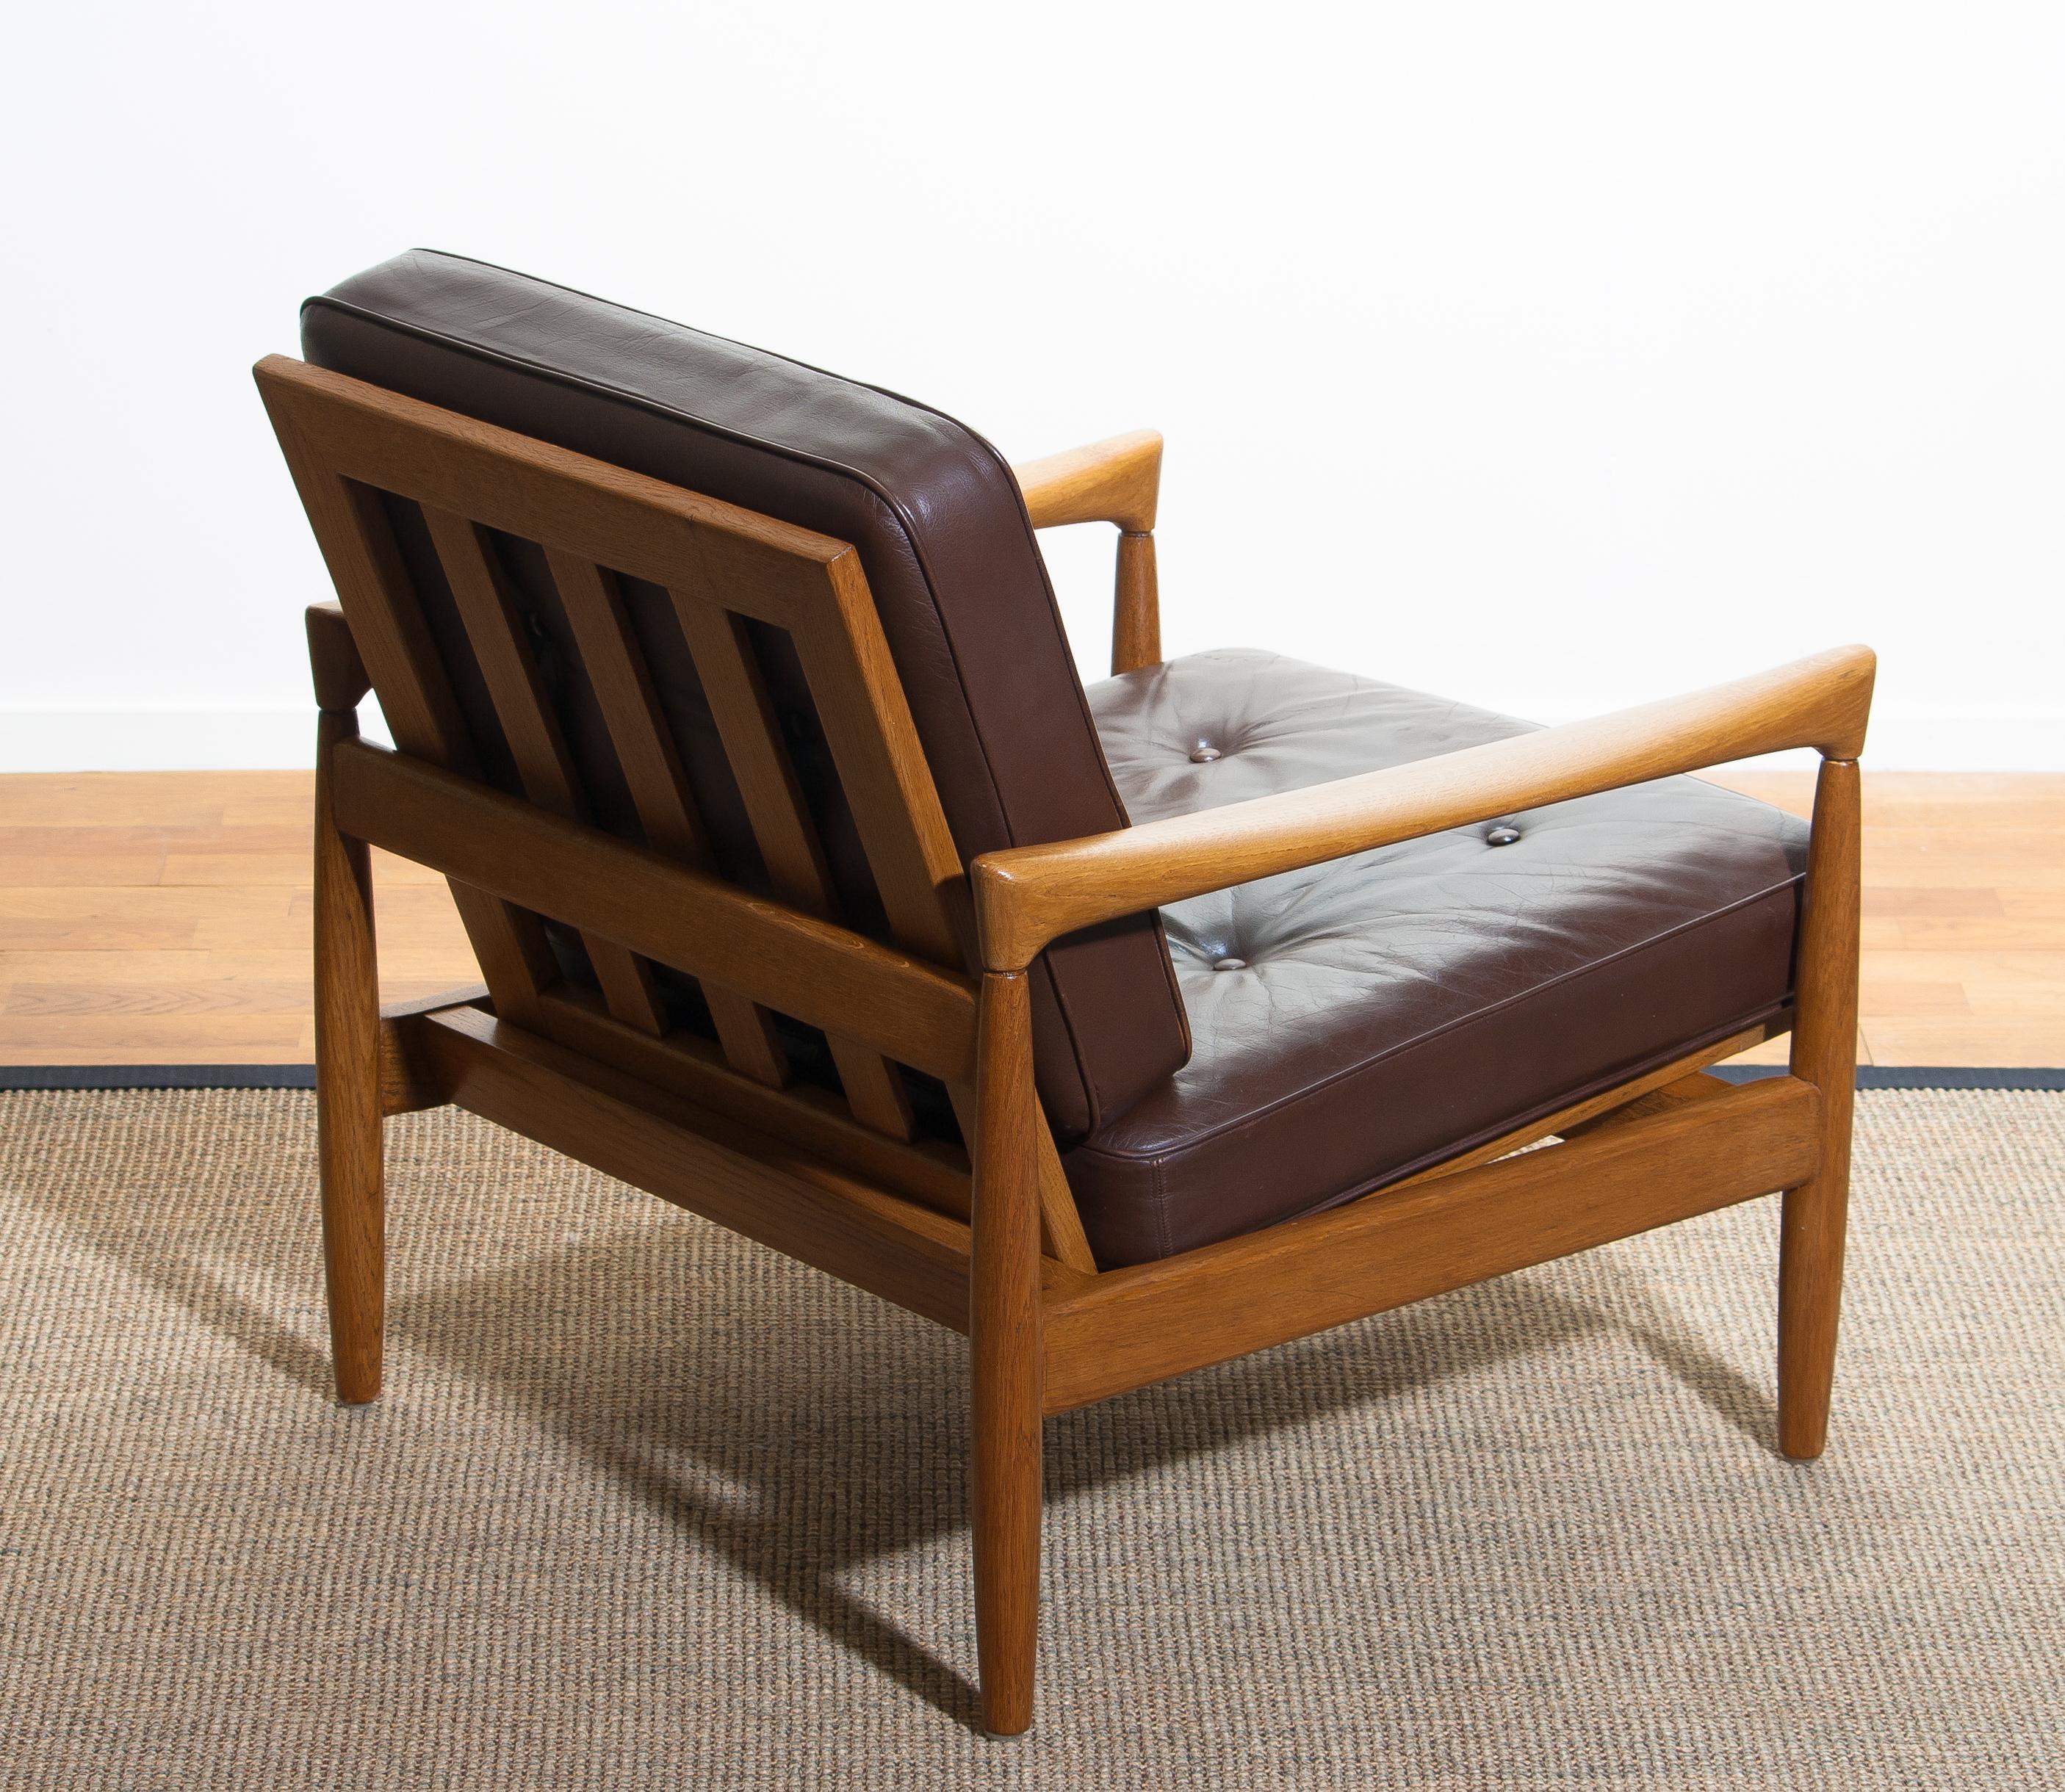 1960s, Oak and Brown Leather Lounge Chair by Erik Wörtz for Bröderna Anderssons 1